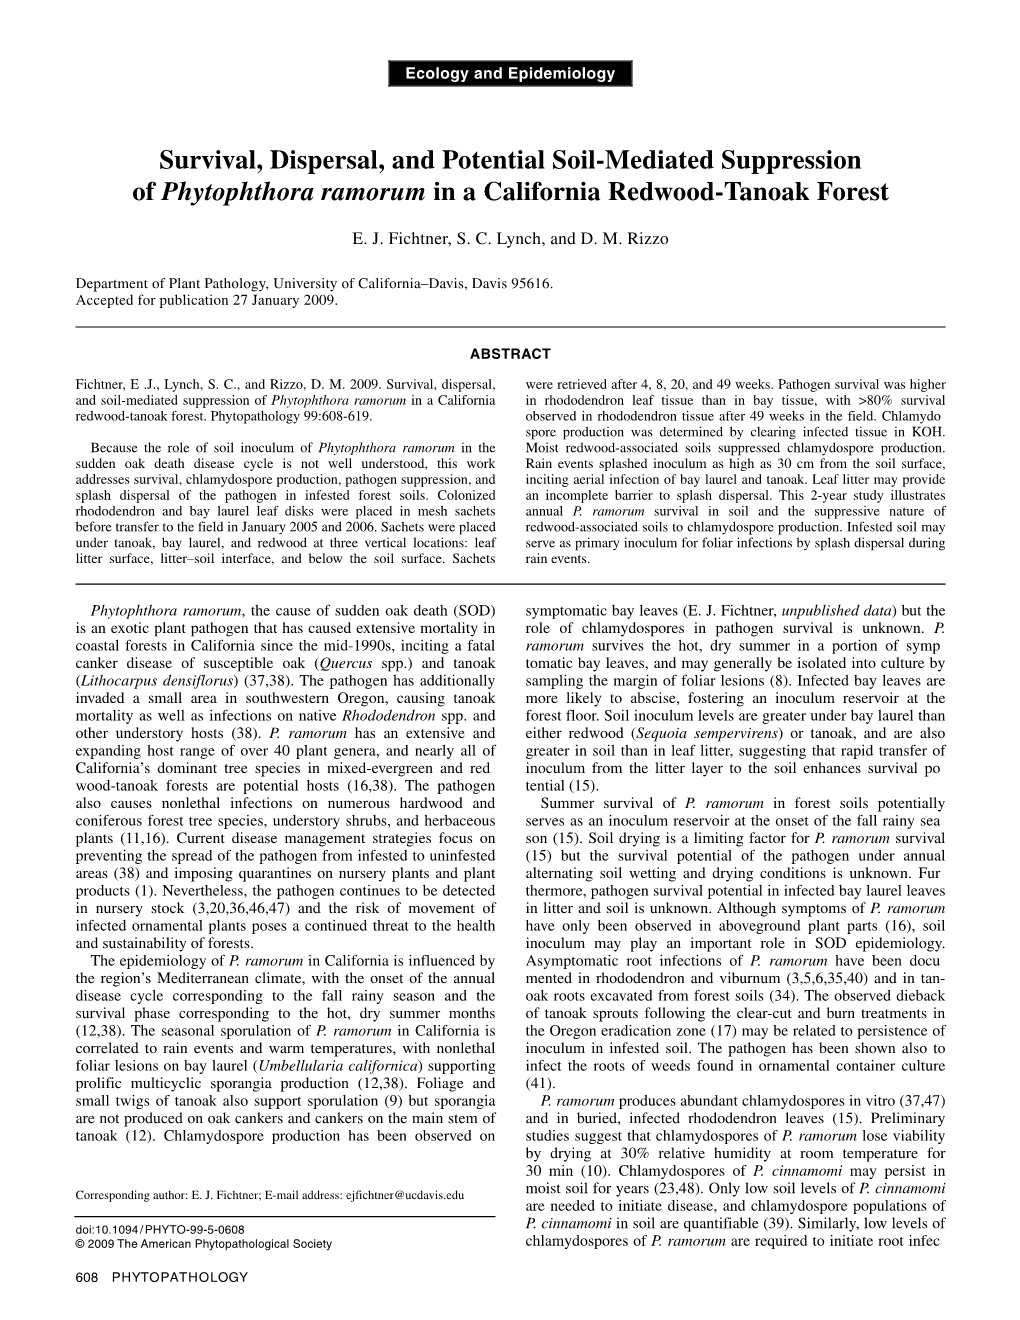 Survival, Dispersal, and Potential Soil-Mediated Suppression of Phytophthora Ramorum in a California Redwood-Tanoak Forest